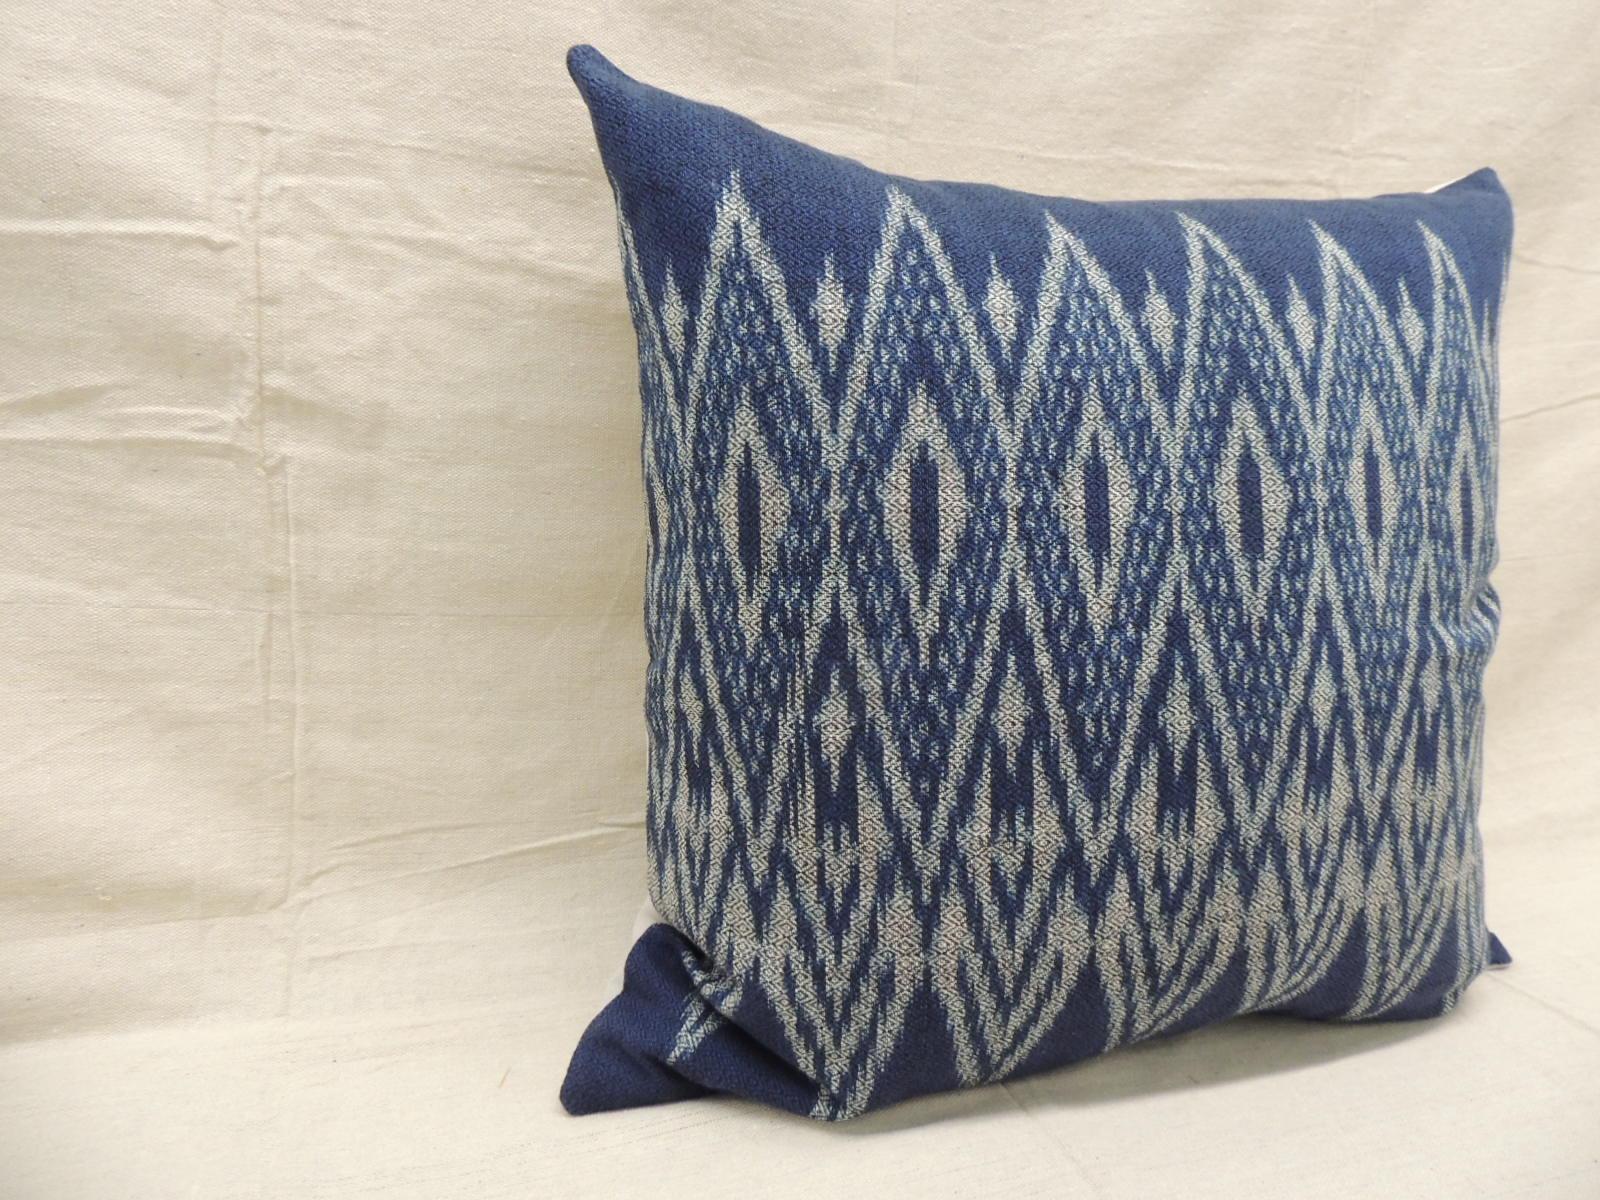 Vintage blue and white Ikat decorative square pillow.
Greyish woven cotton backing.
Decorative pillow handcrafted and designed in the USA. 
Closure by stitch (no zipper closure) with custom made pillow insert.
Size: 20